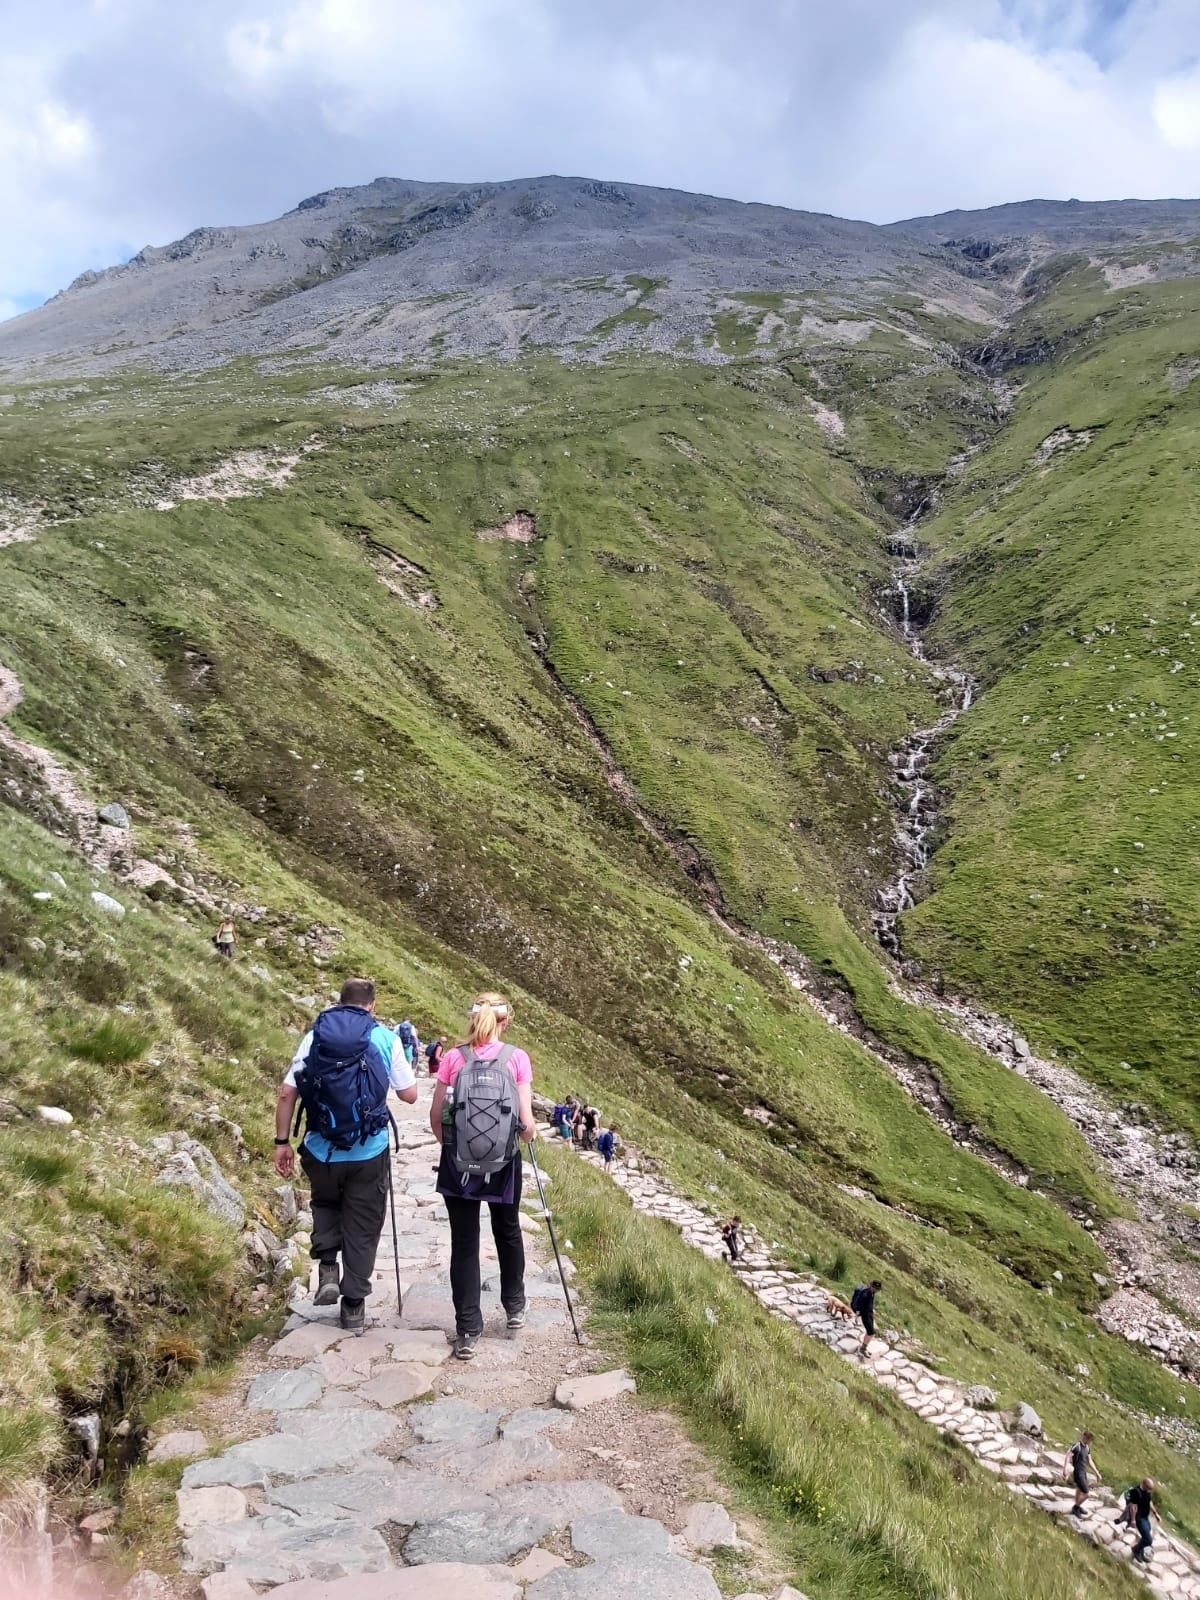 Continued Care staff walking the Peak District in aid of Alzheimer's Society